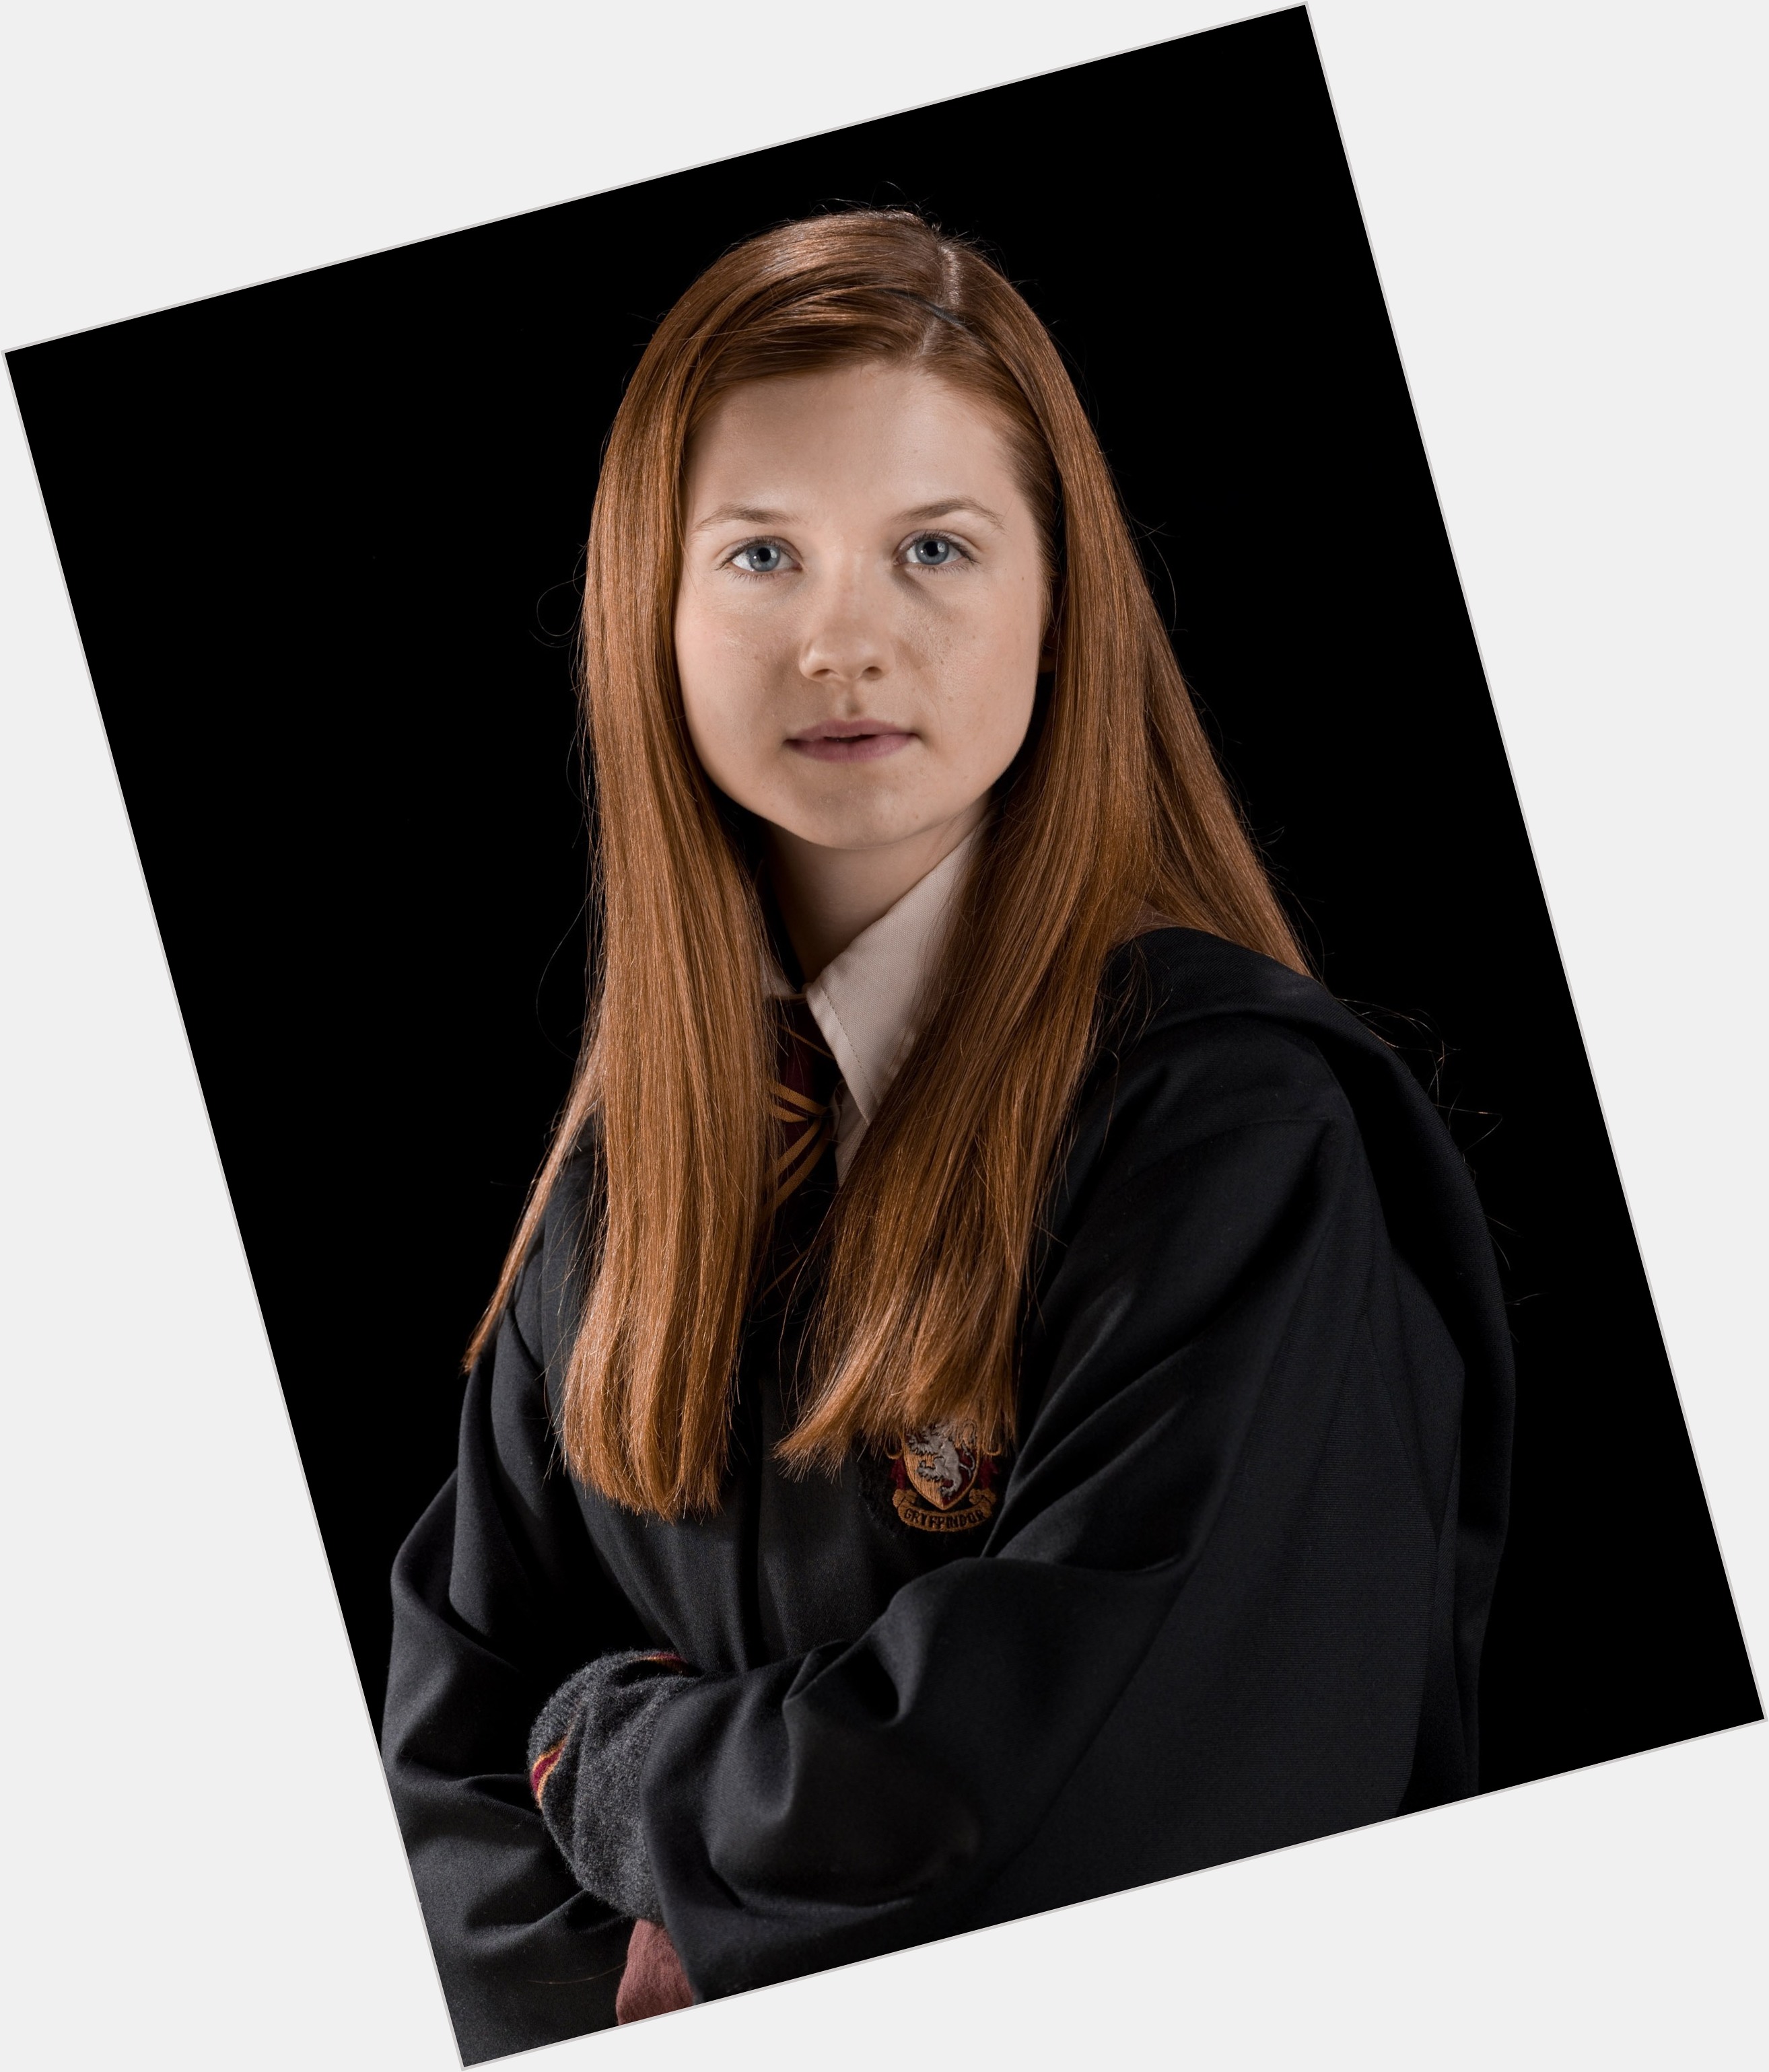 <a href="/hot-women/ginny-weasley/is-she-powerful-mary-sue-married-heir-slytherin">Ginny Weasley</a> Average body,  red hair & hairstyles